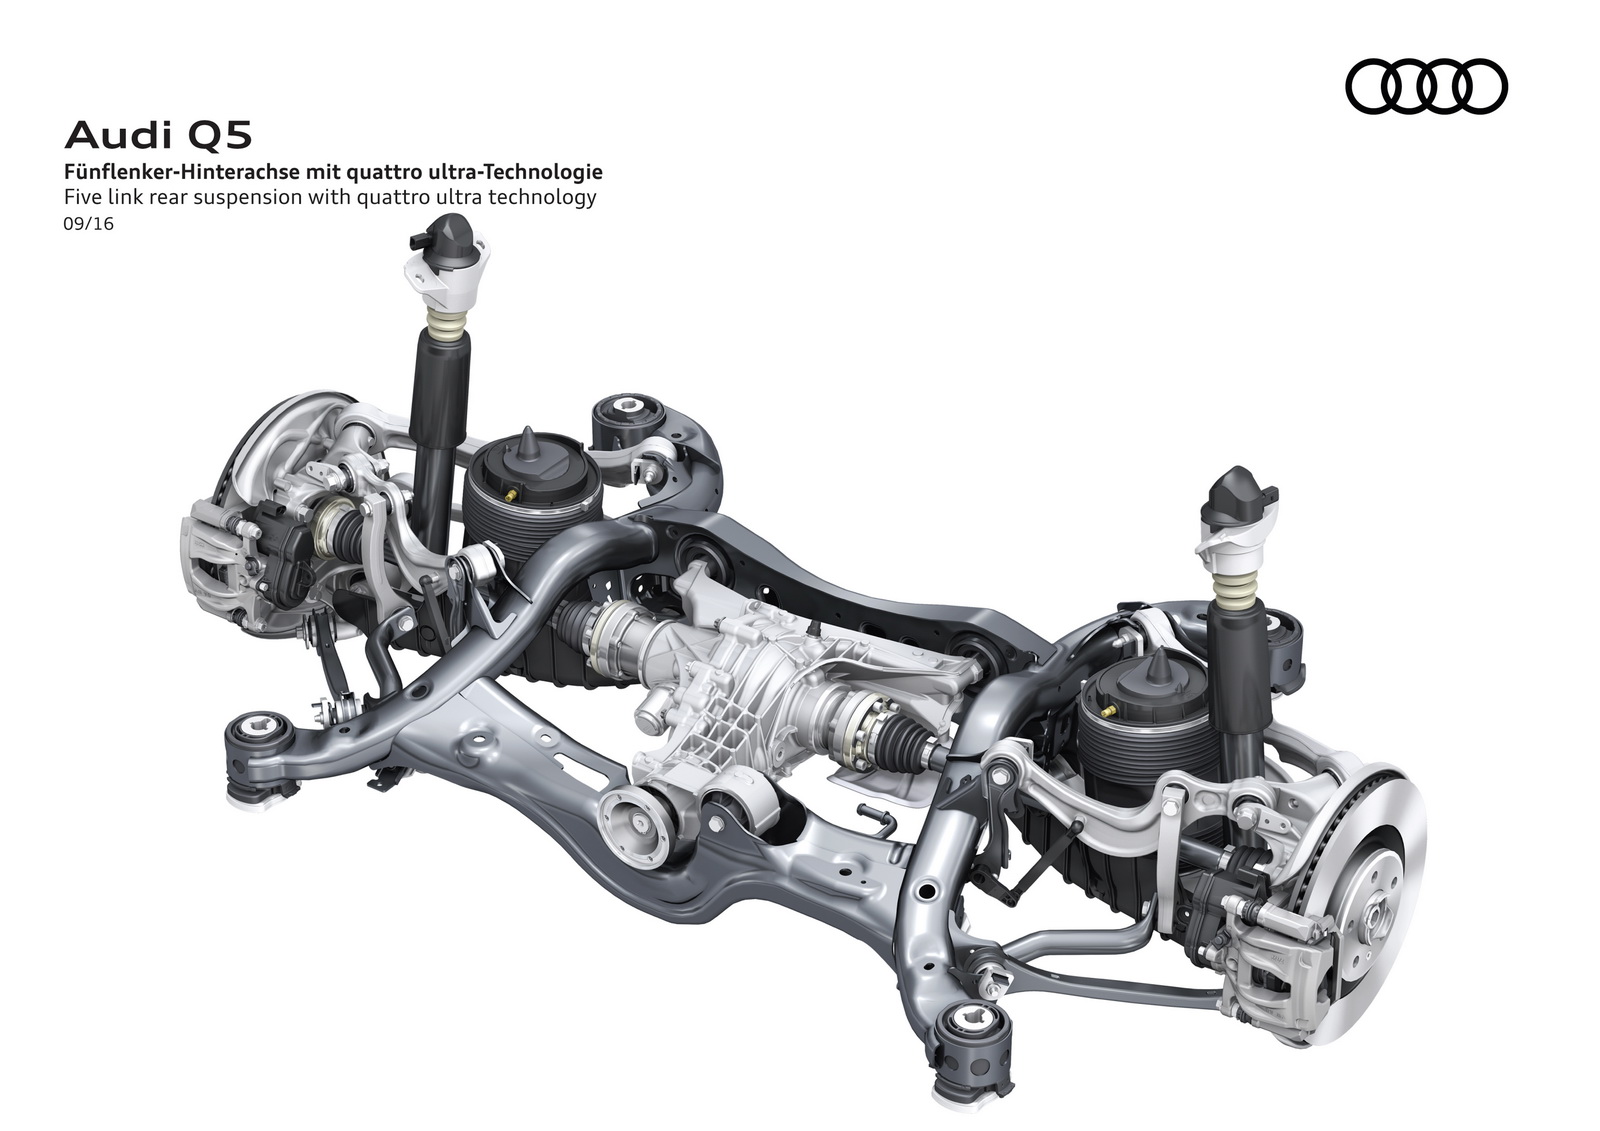 Five link rear suspension with quattro ultra technology